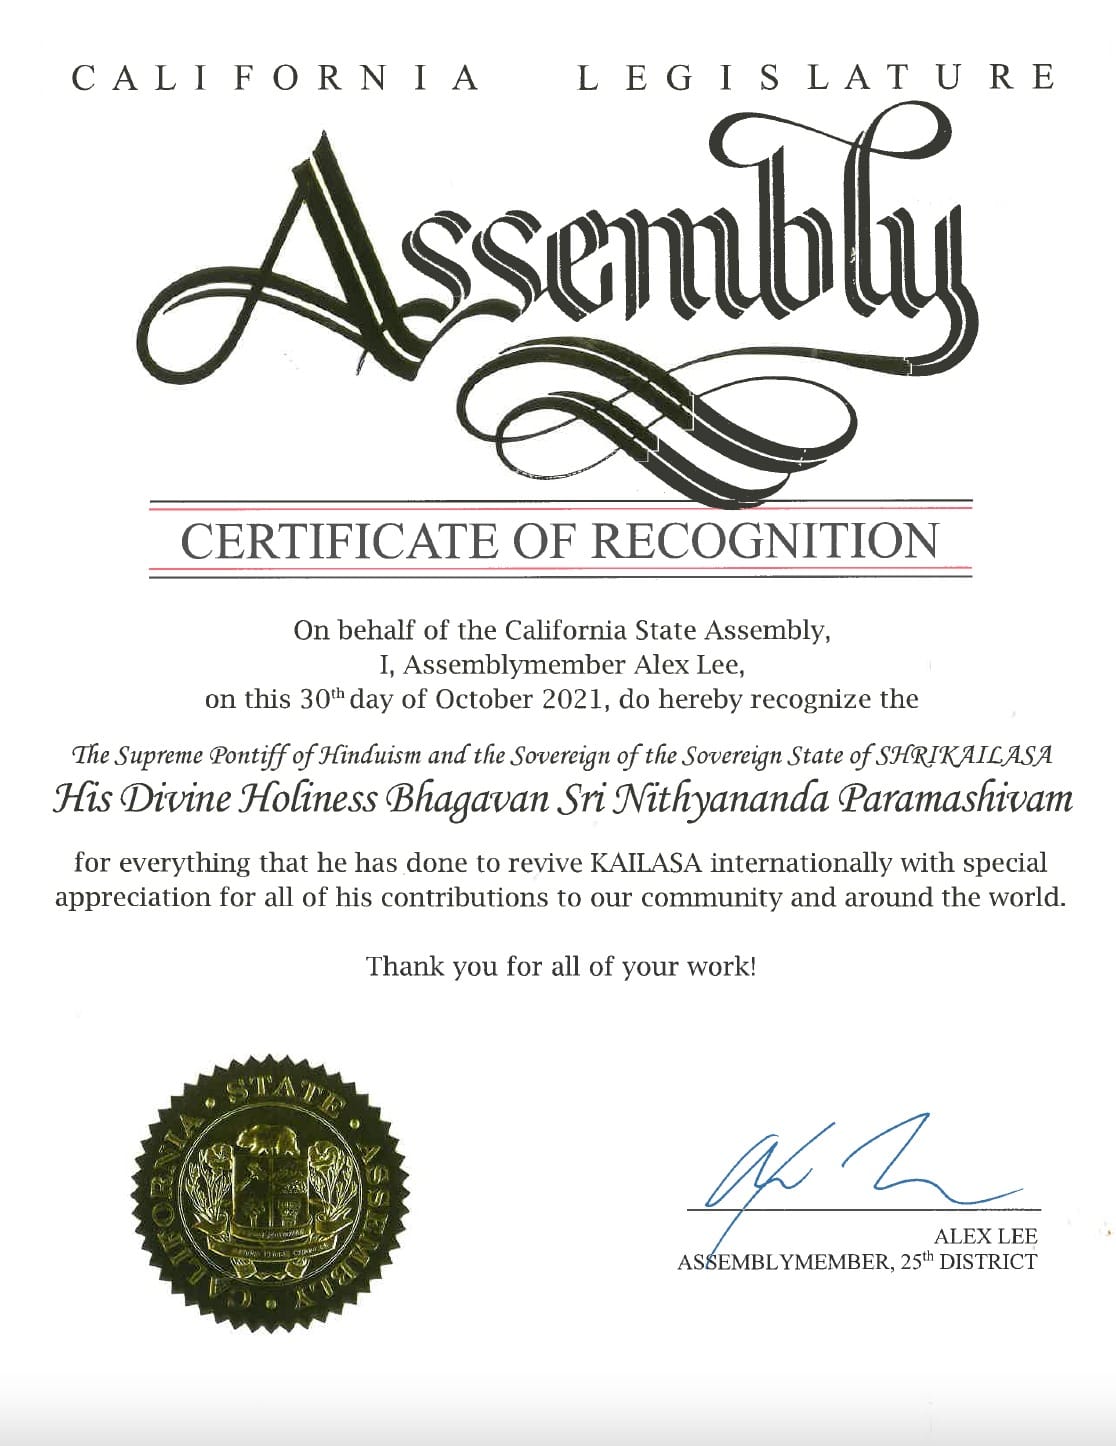 Recognition-California-State-Assembly-alex-lee-2021-10-30.jpg